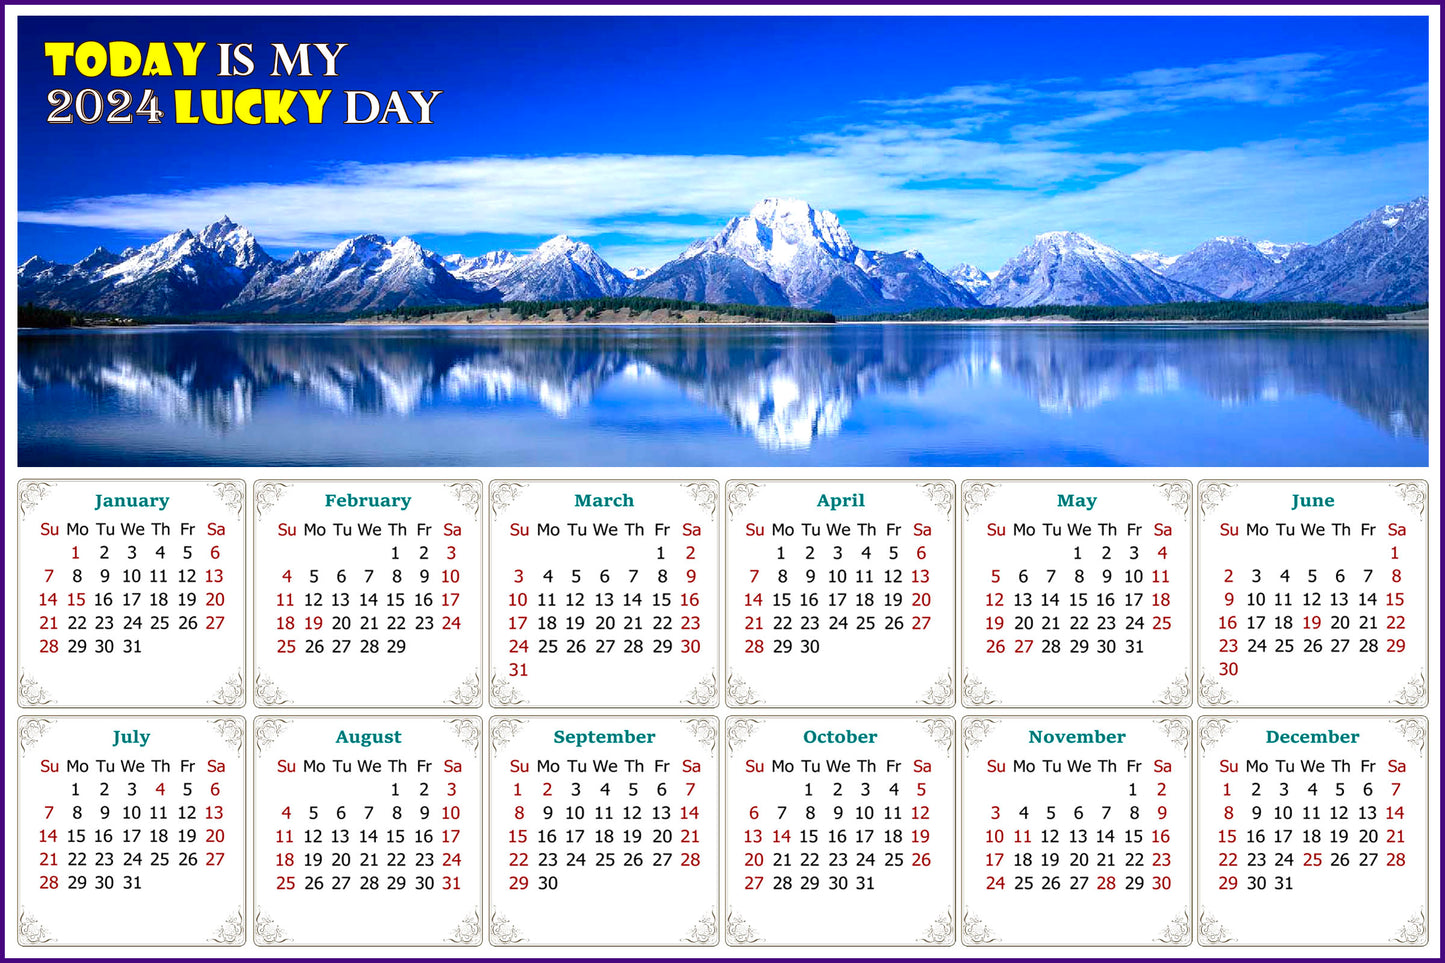 2024 Magnetic Calendar - Calendar Magnets - Today is My Lucky Day - (Jackson Lake Wyoming)